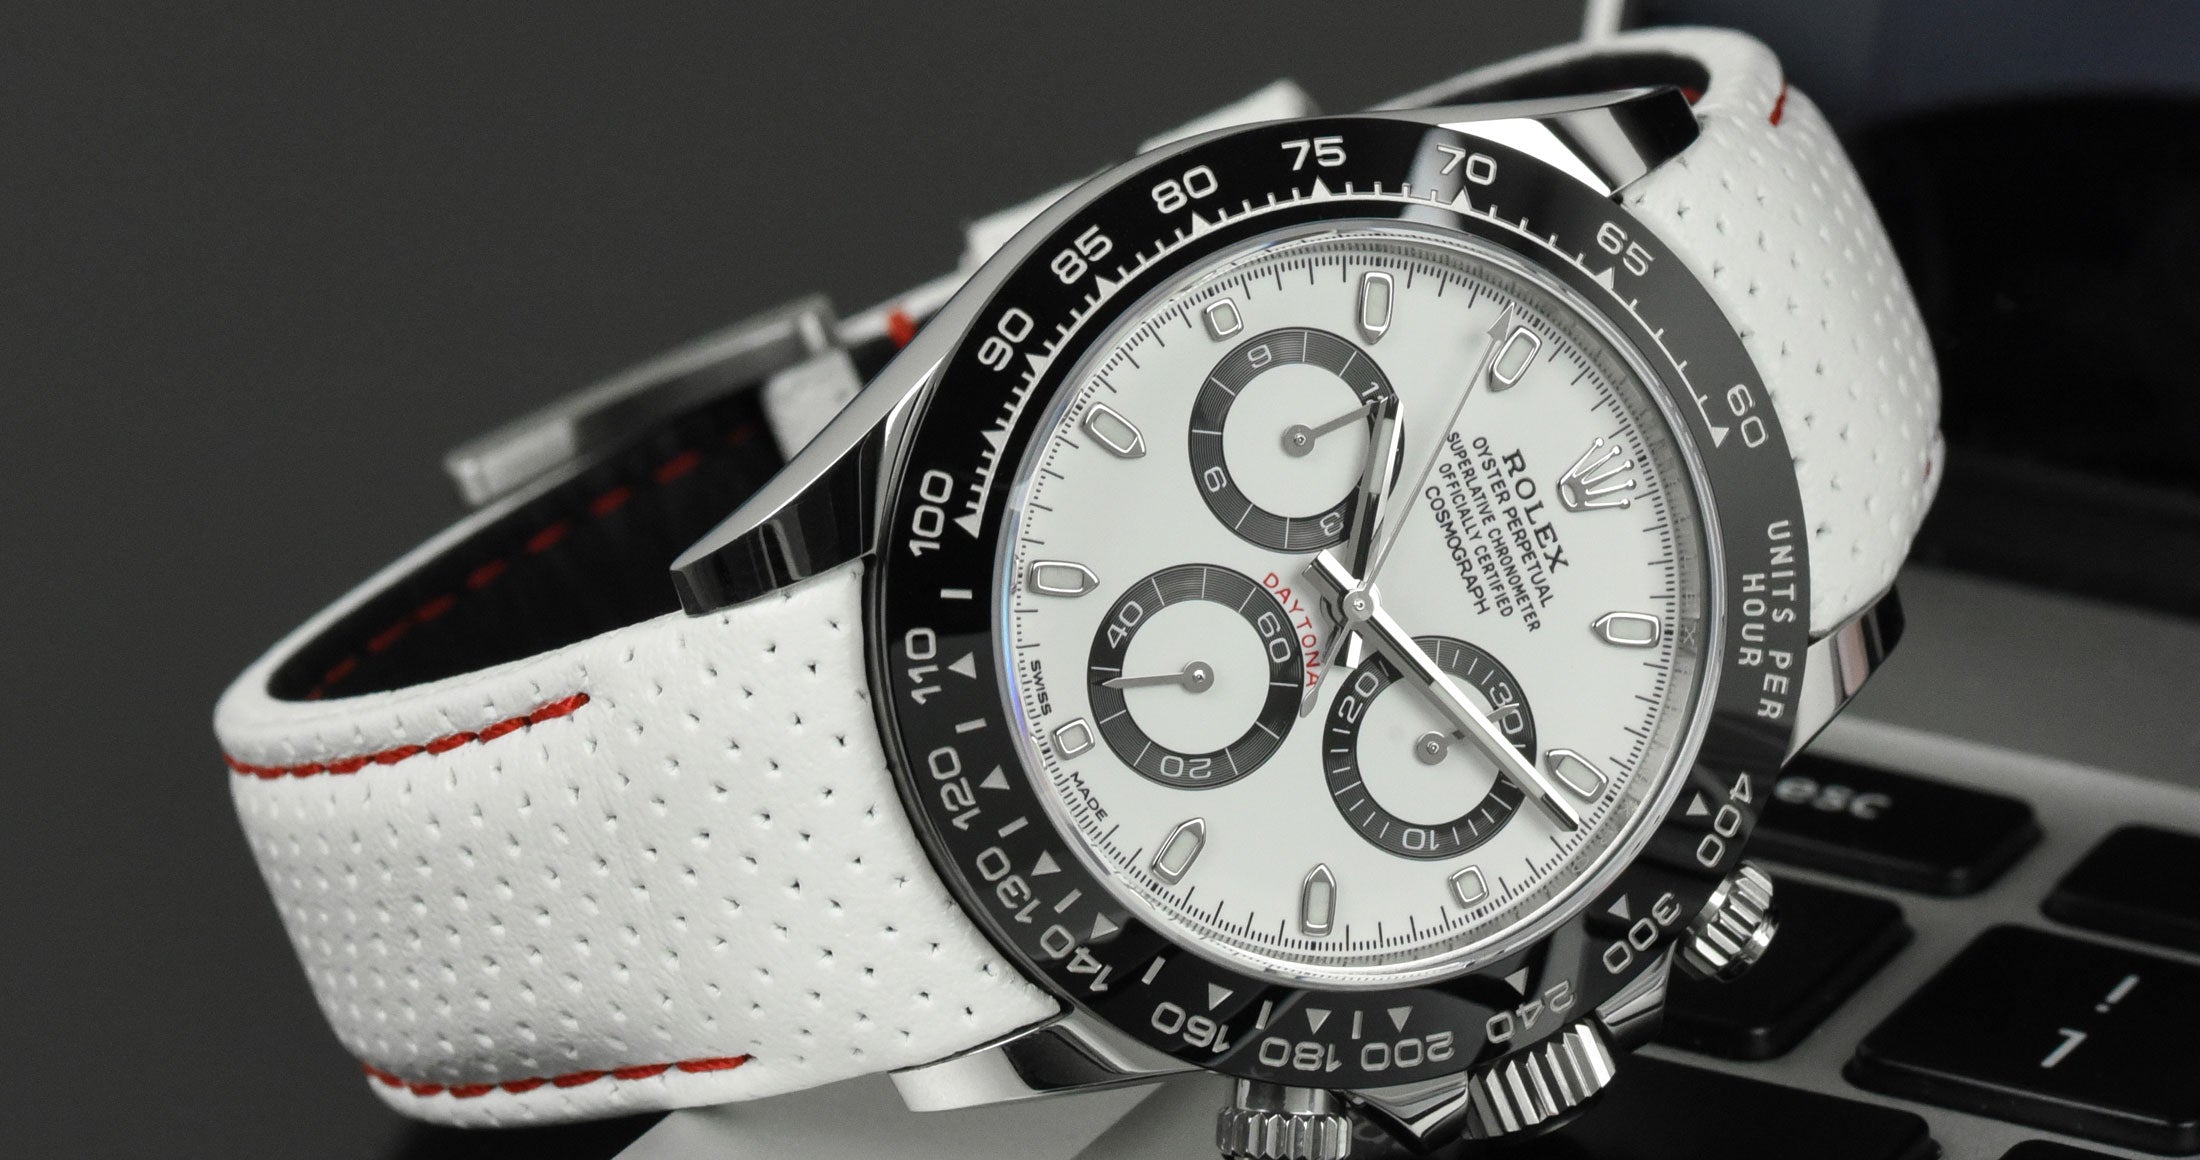 Perforated Leather Strap on Rolex Daytona - White with Red Stitching